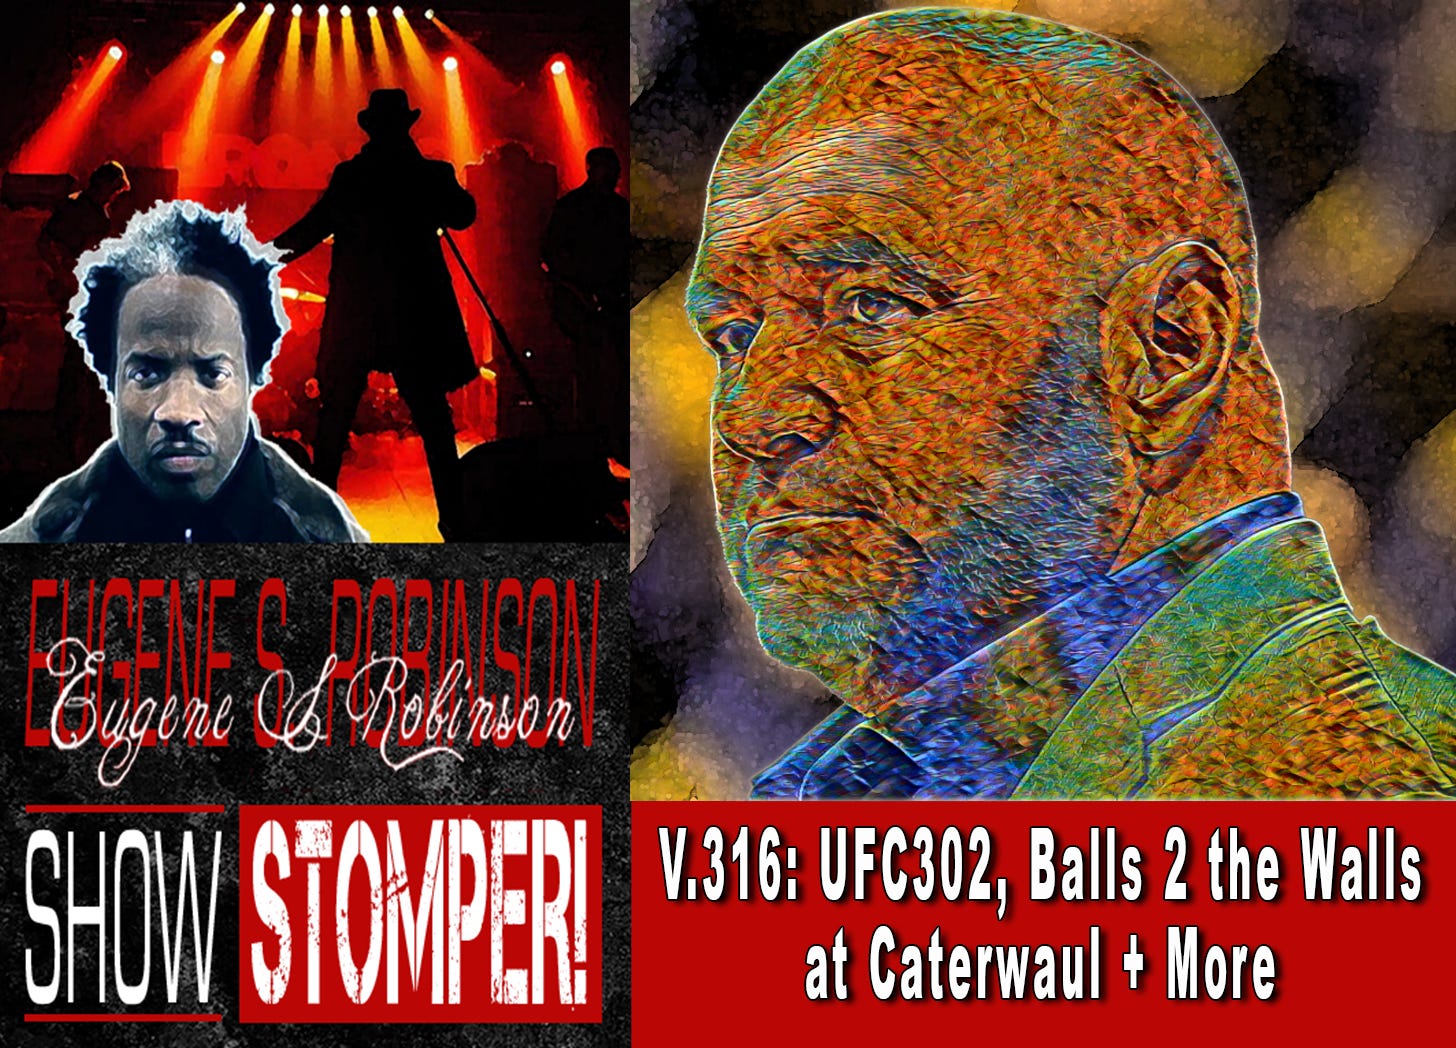 V.316: UFC302, Balls 2 the Walls at Caterwaul + More All On The Eugene S. Robinson Show Stomper!